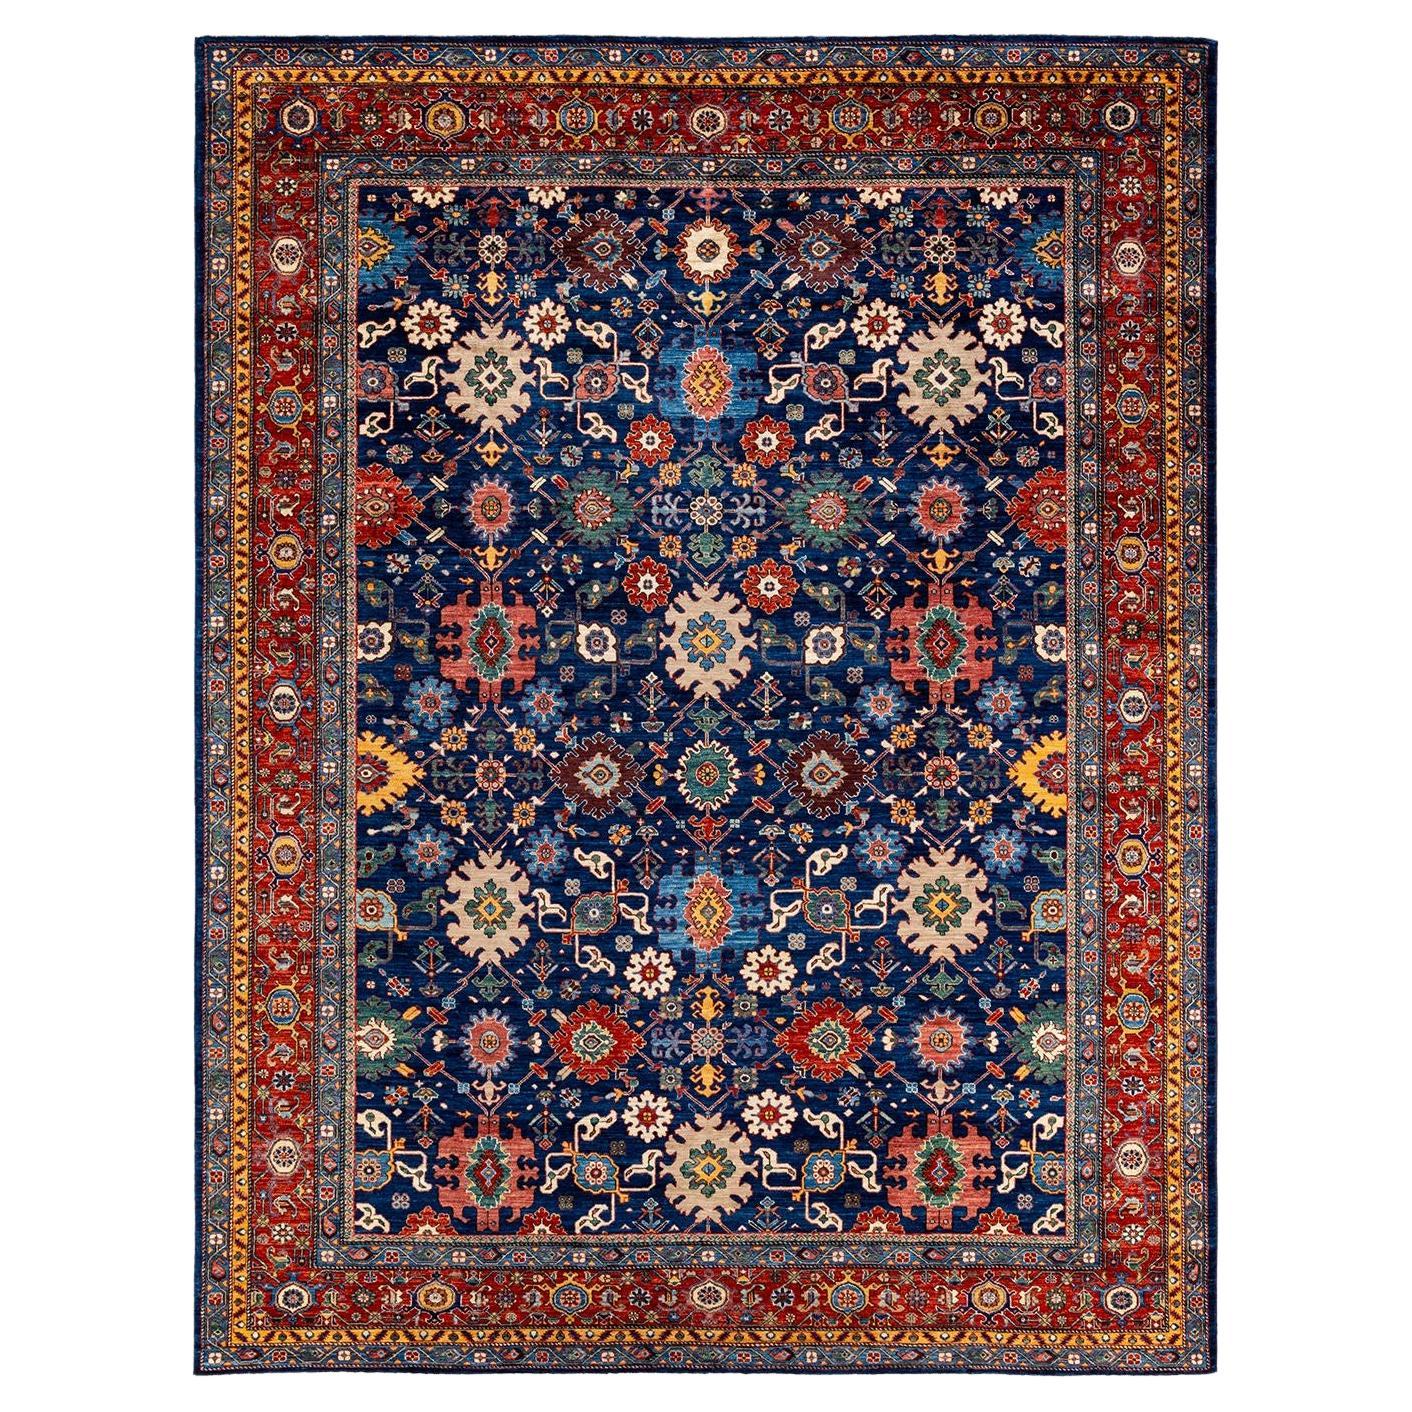 Serapi, One-of-a-Kind Hand-Knotted Runner Rug, Blue